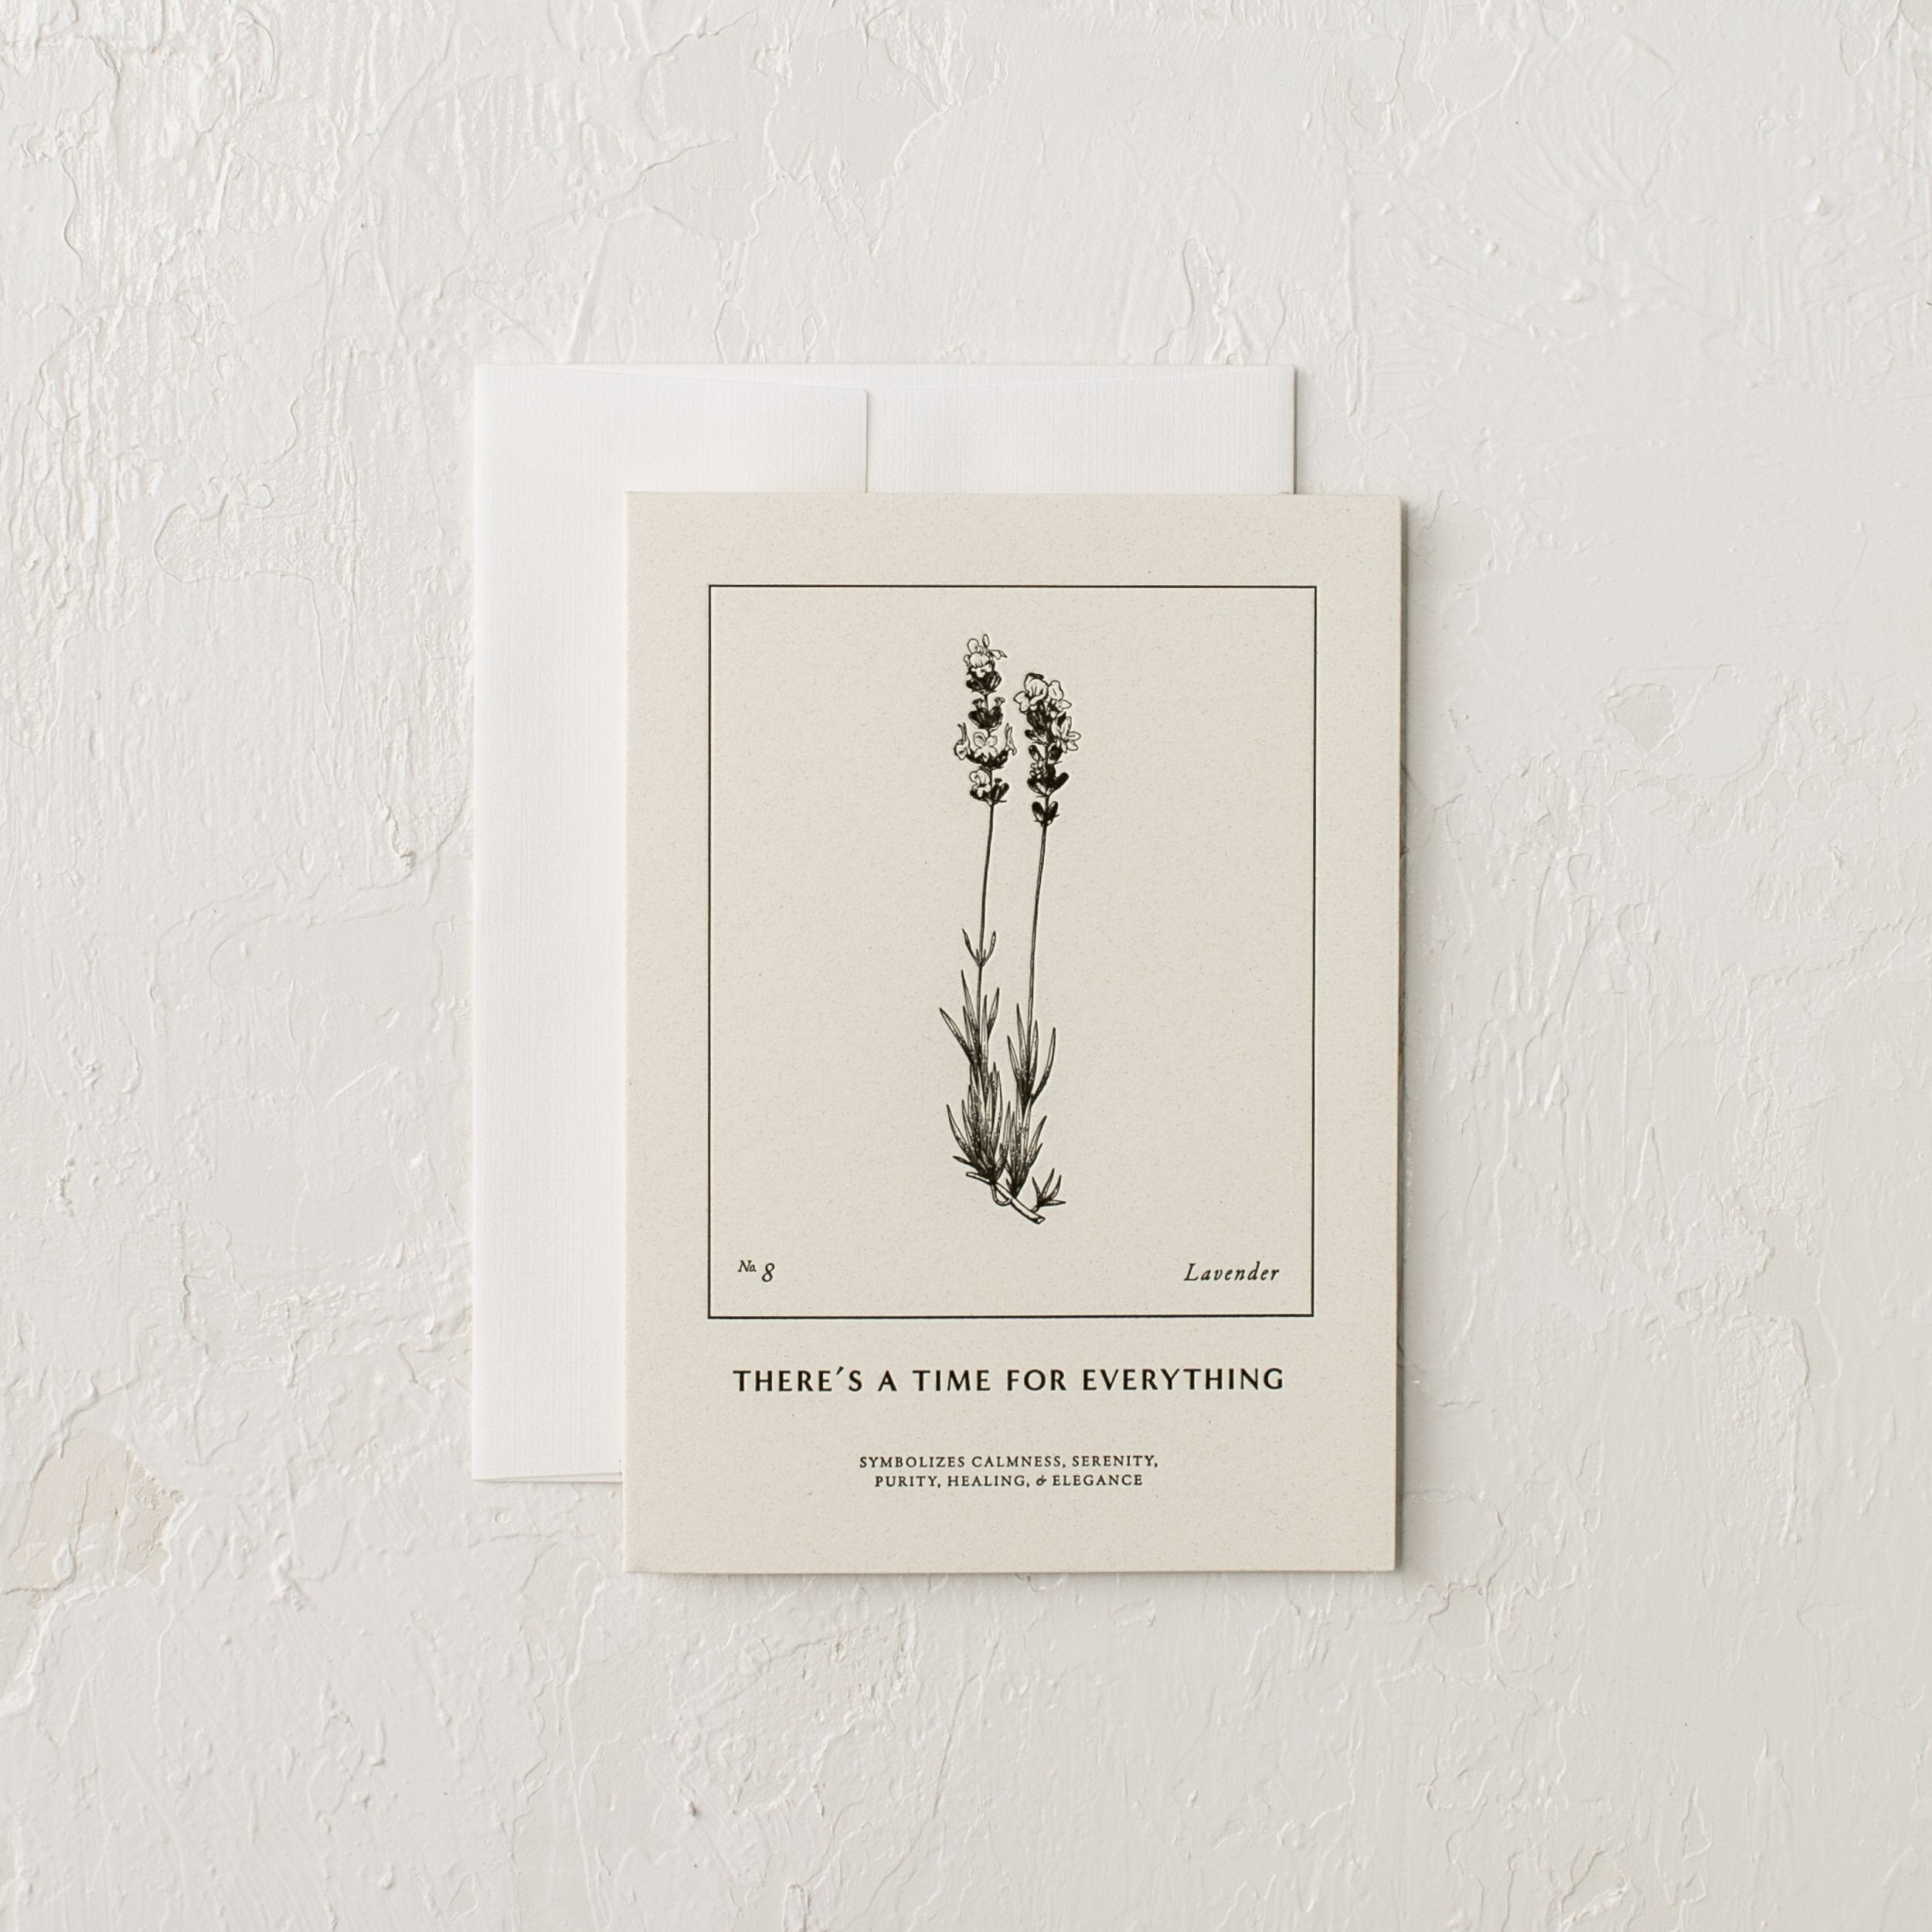 Letter pressed greeting card with a botanical illustrated Lavender, "There's a Time for Everything" - Symbolizes Calmness, serenity, purity, healing and elegance." Designed and sold by Verdant, Kansas City.